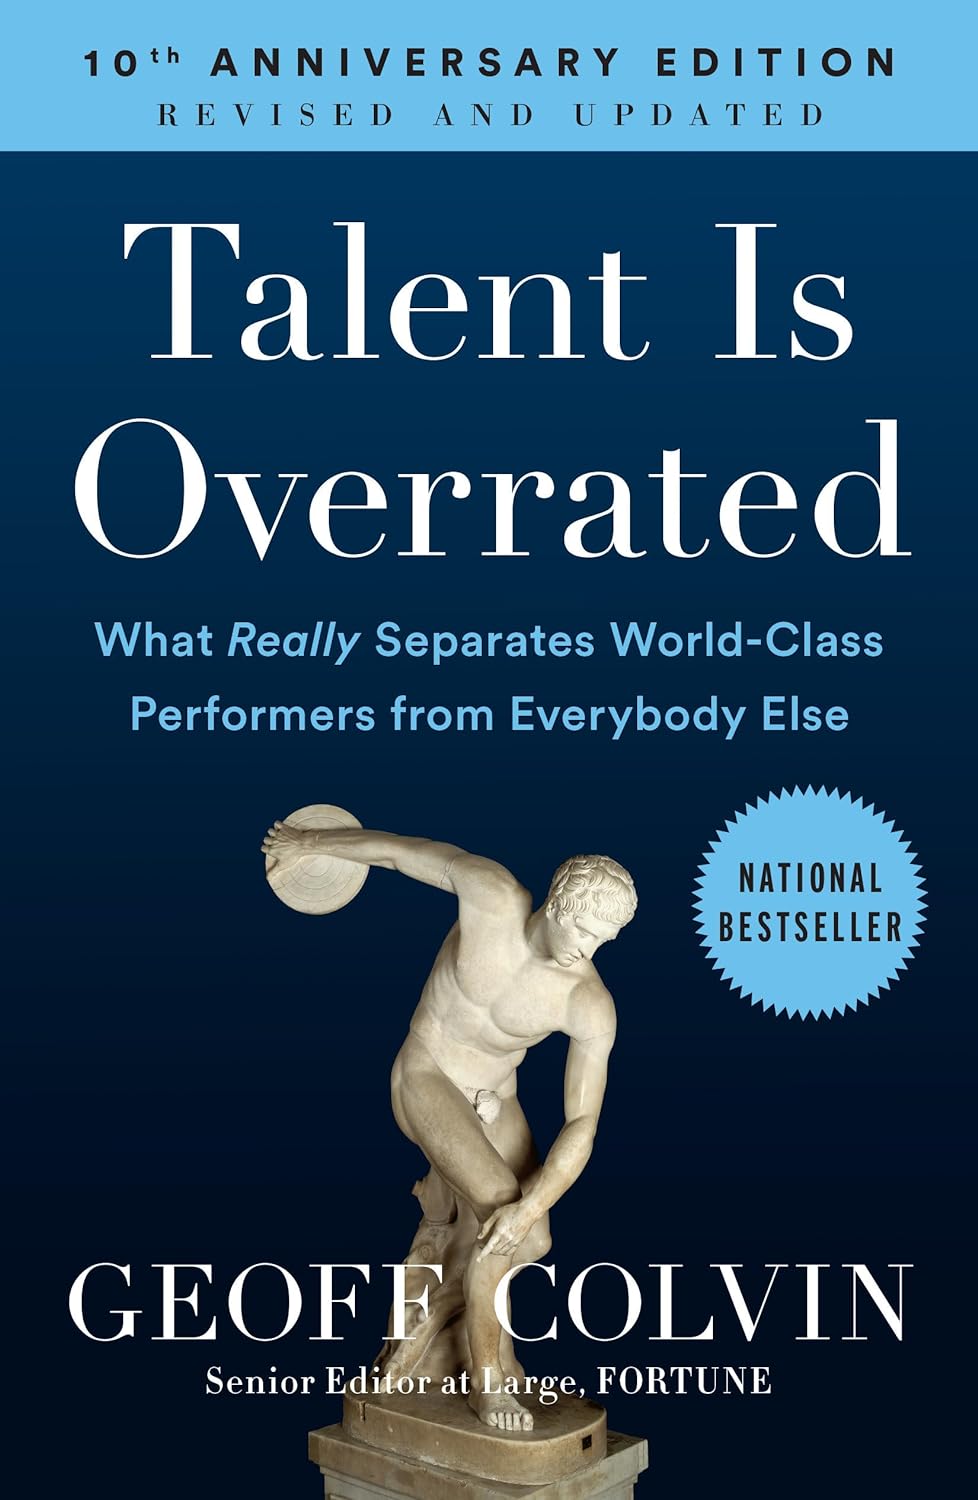 Talent is Overrated book cover